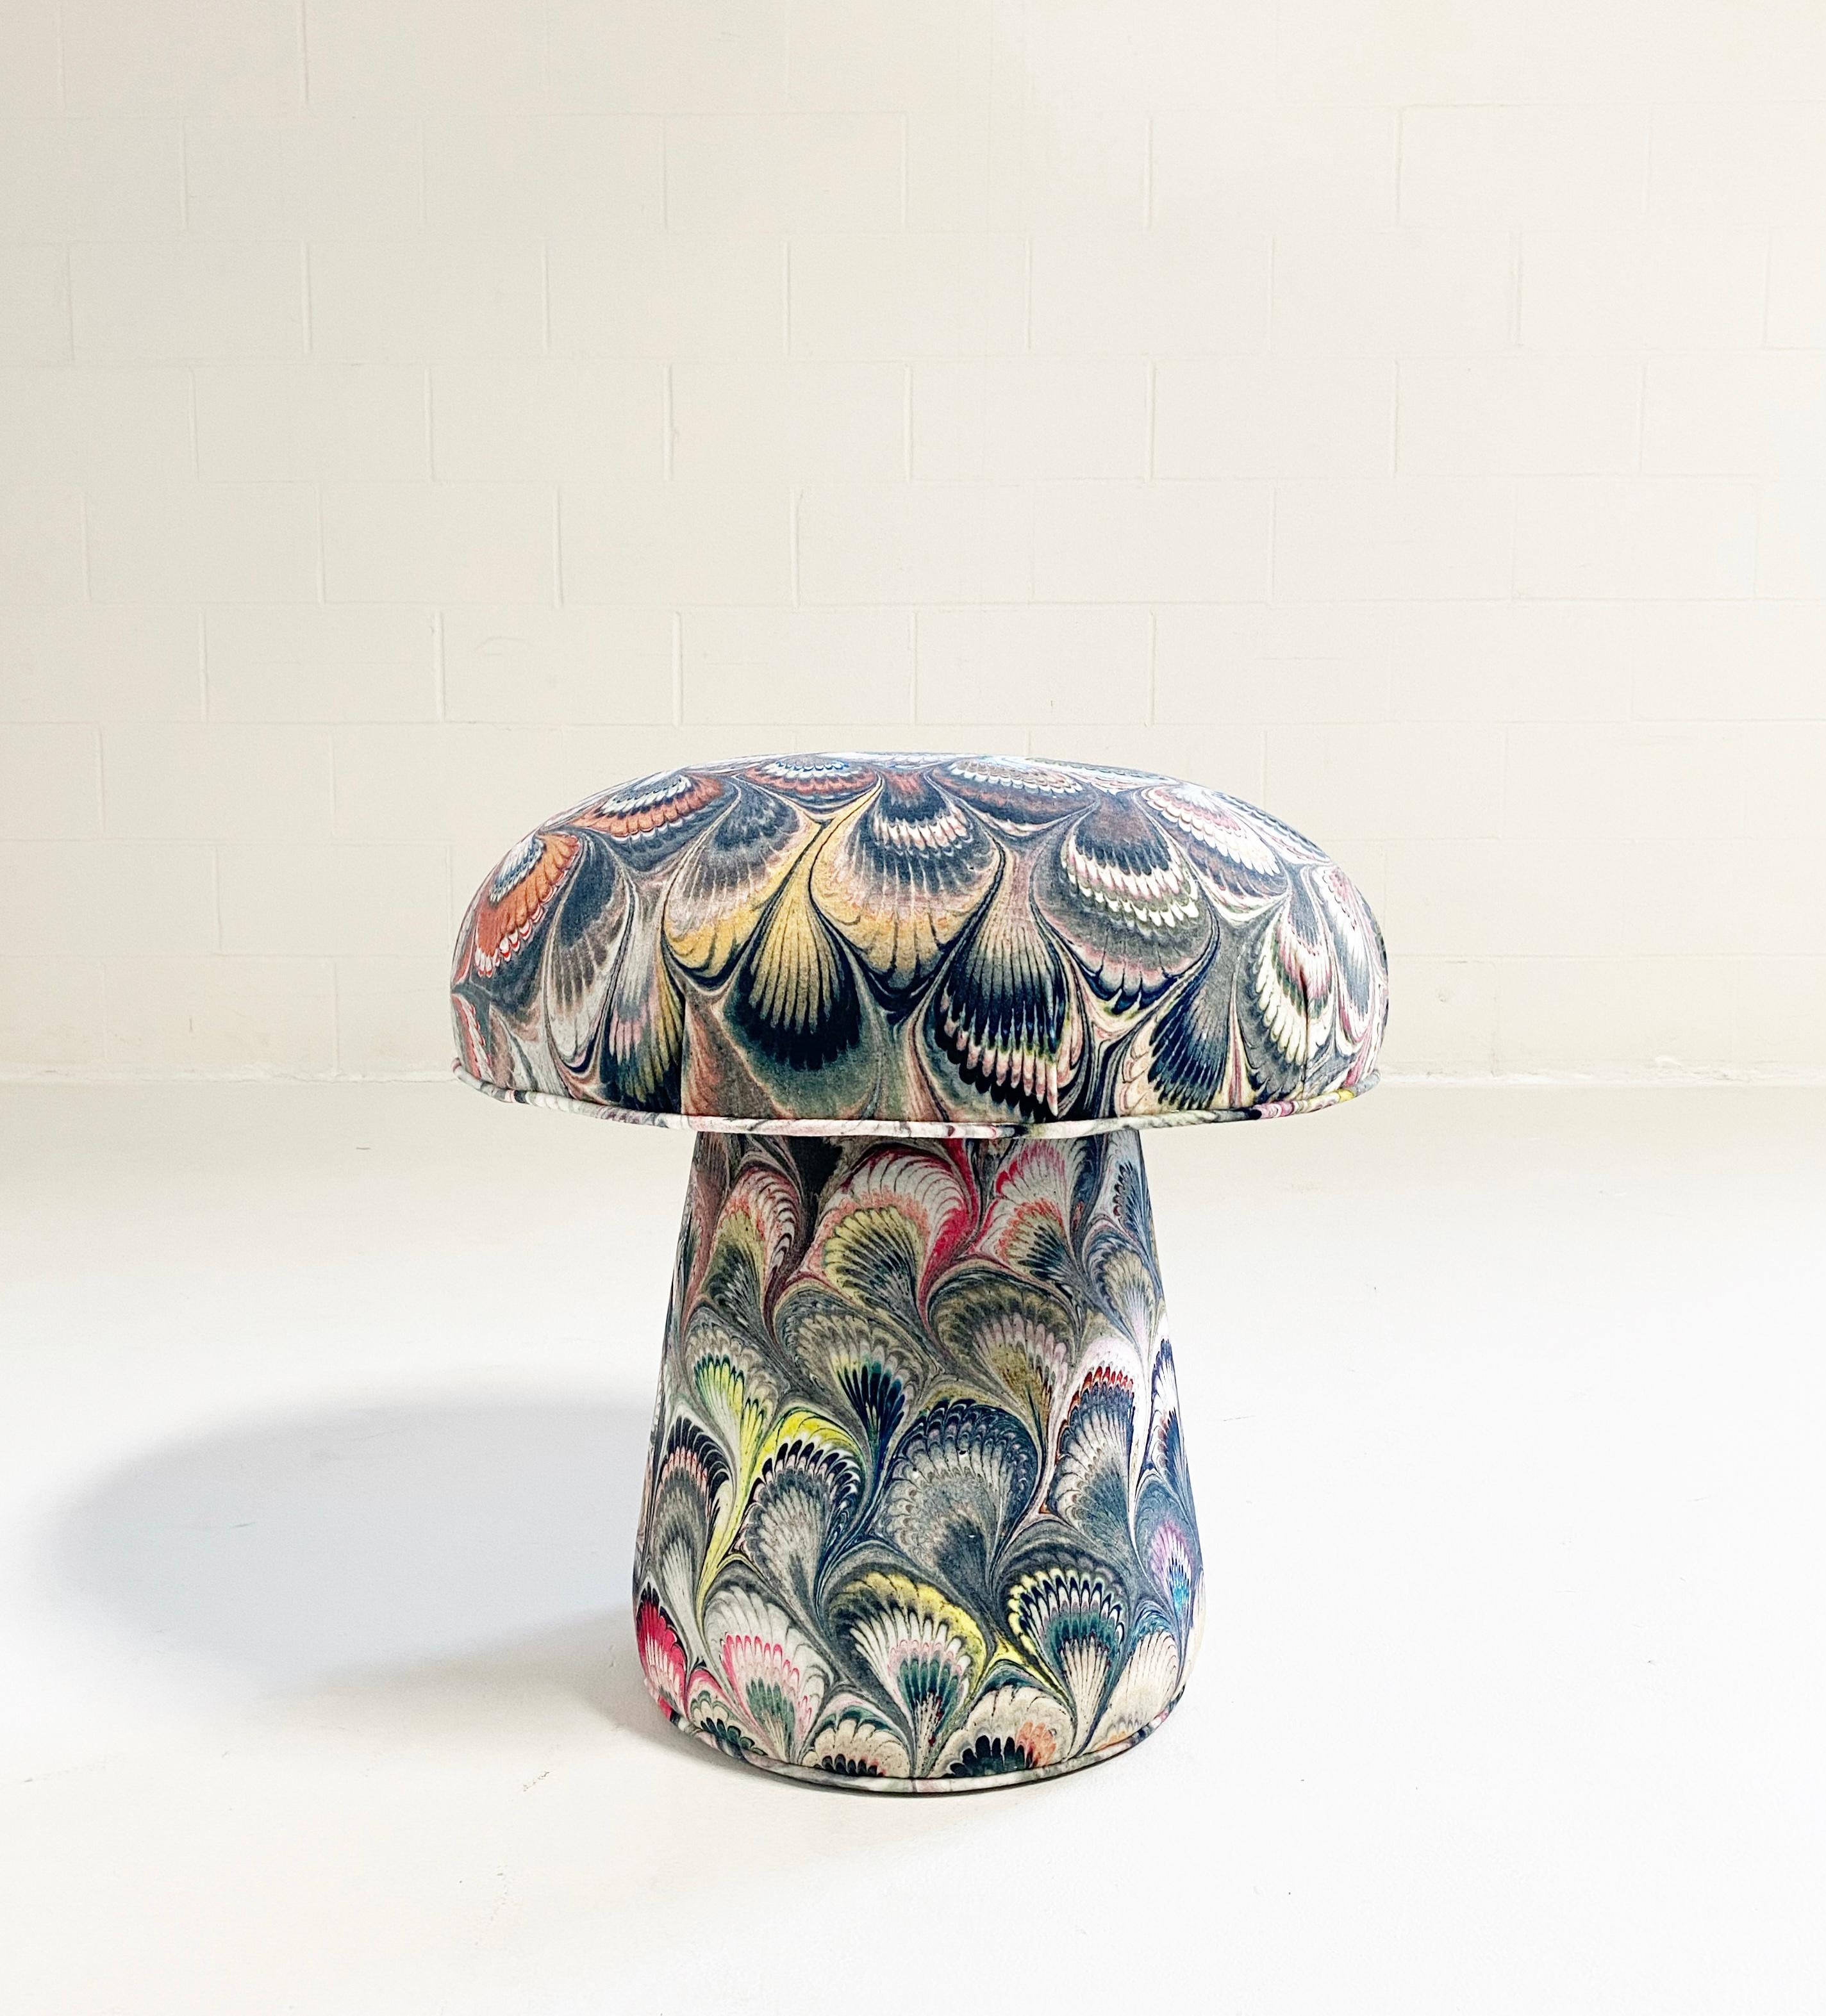 This Forsyth Mushroom Pouf Ottoman was created and designed by the Forsyth design team. Each ottoman is handcrafted in Saint Louis. A cute decorative piece for any room adding natural texture and a bit of whimsy. The perfect ottoman or extra seat.